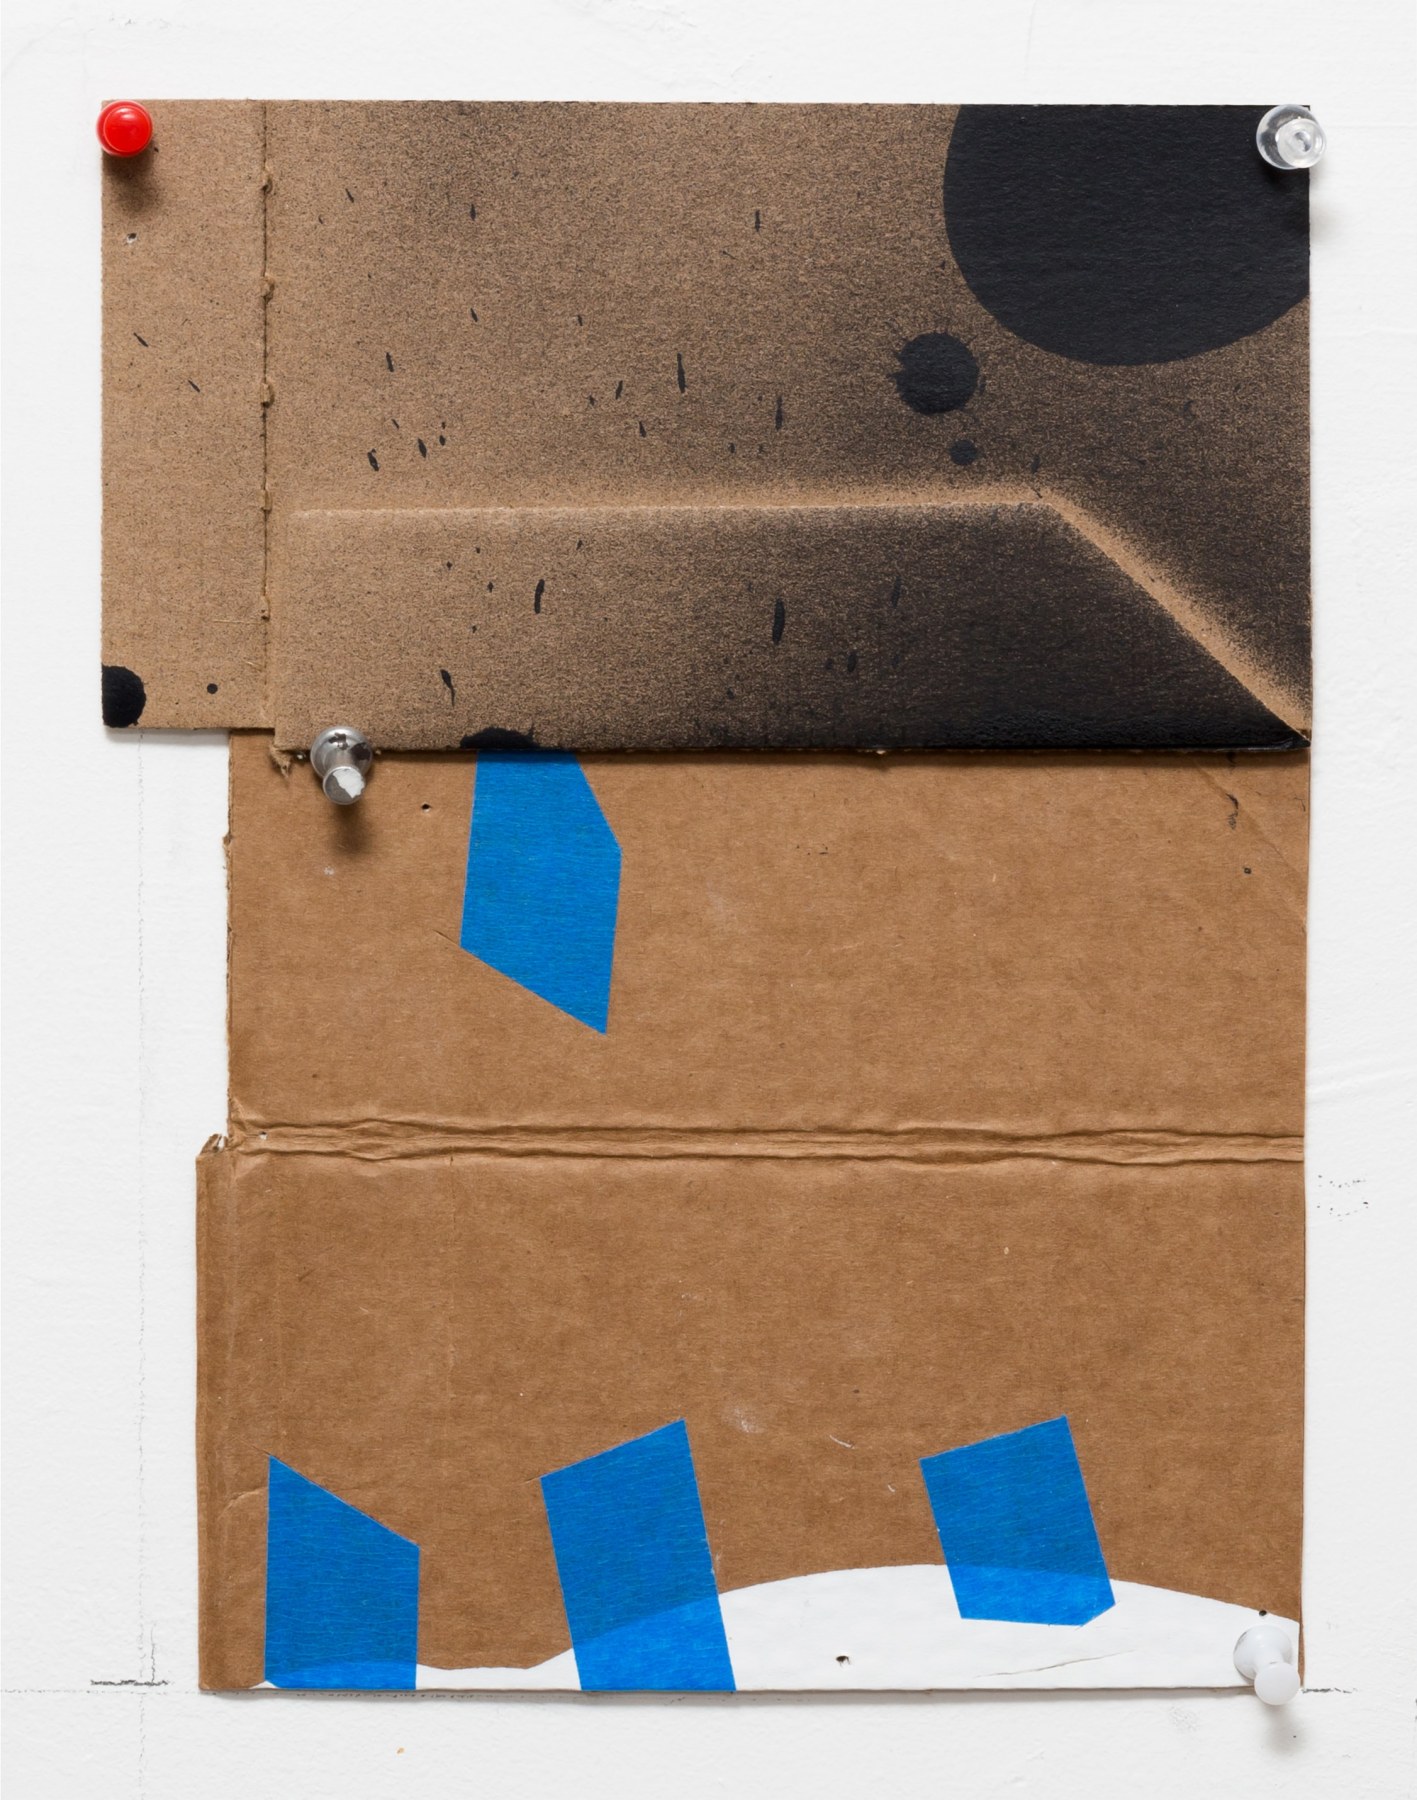 George Negroponte, Lost, 2015-2016,&nbsp;Tape, enamel, acrylic, and spray paint on cardboard, 9 3/4&quot; x 6 3/4&quot; at Anita Rogers Gallery